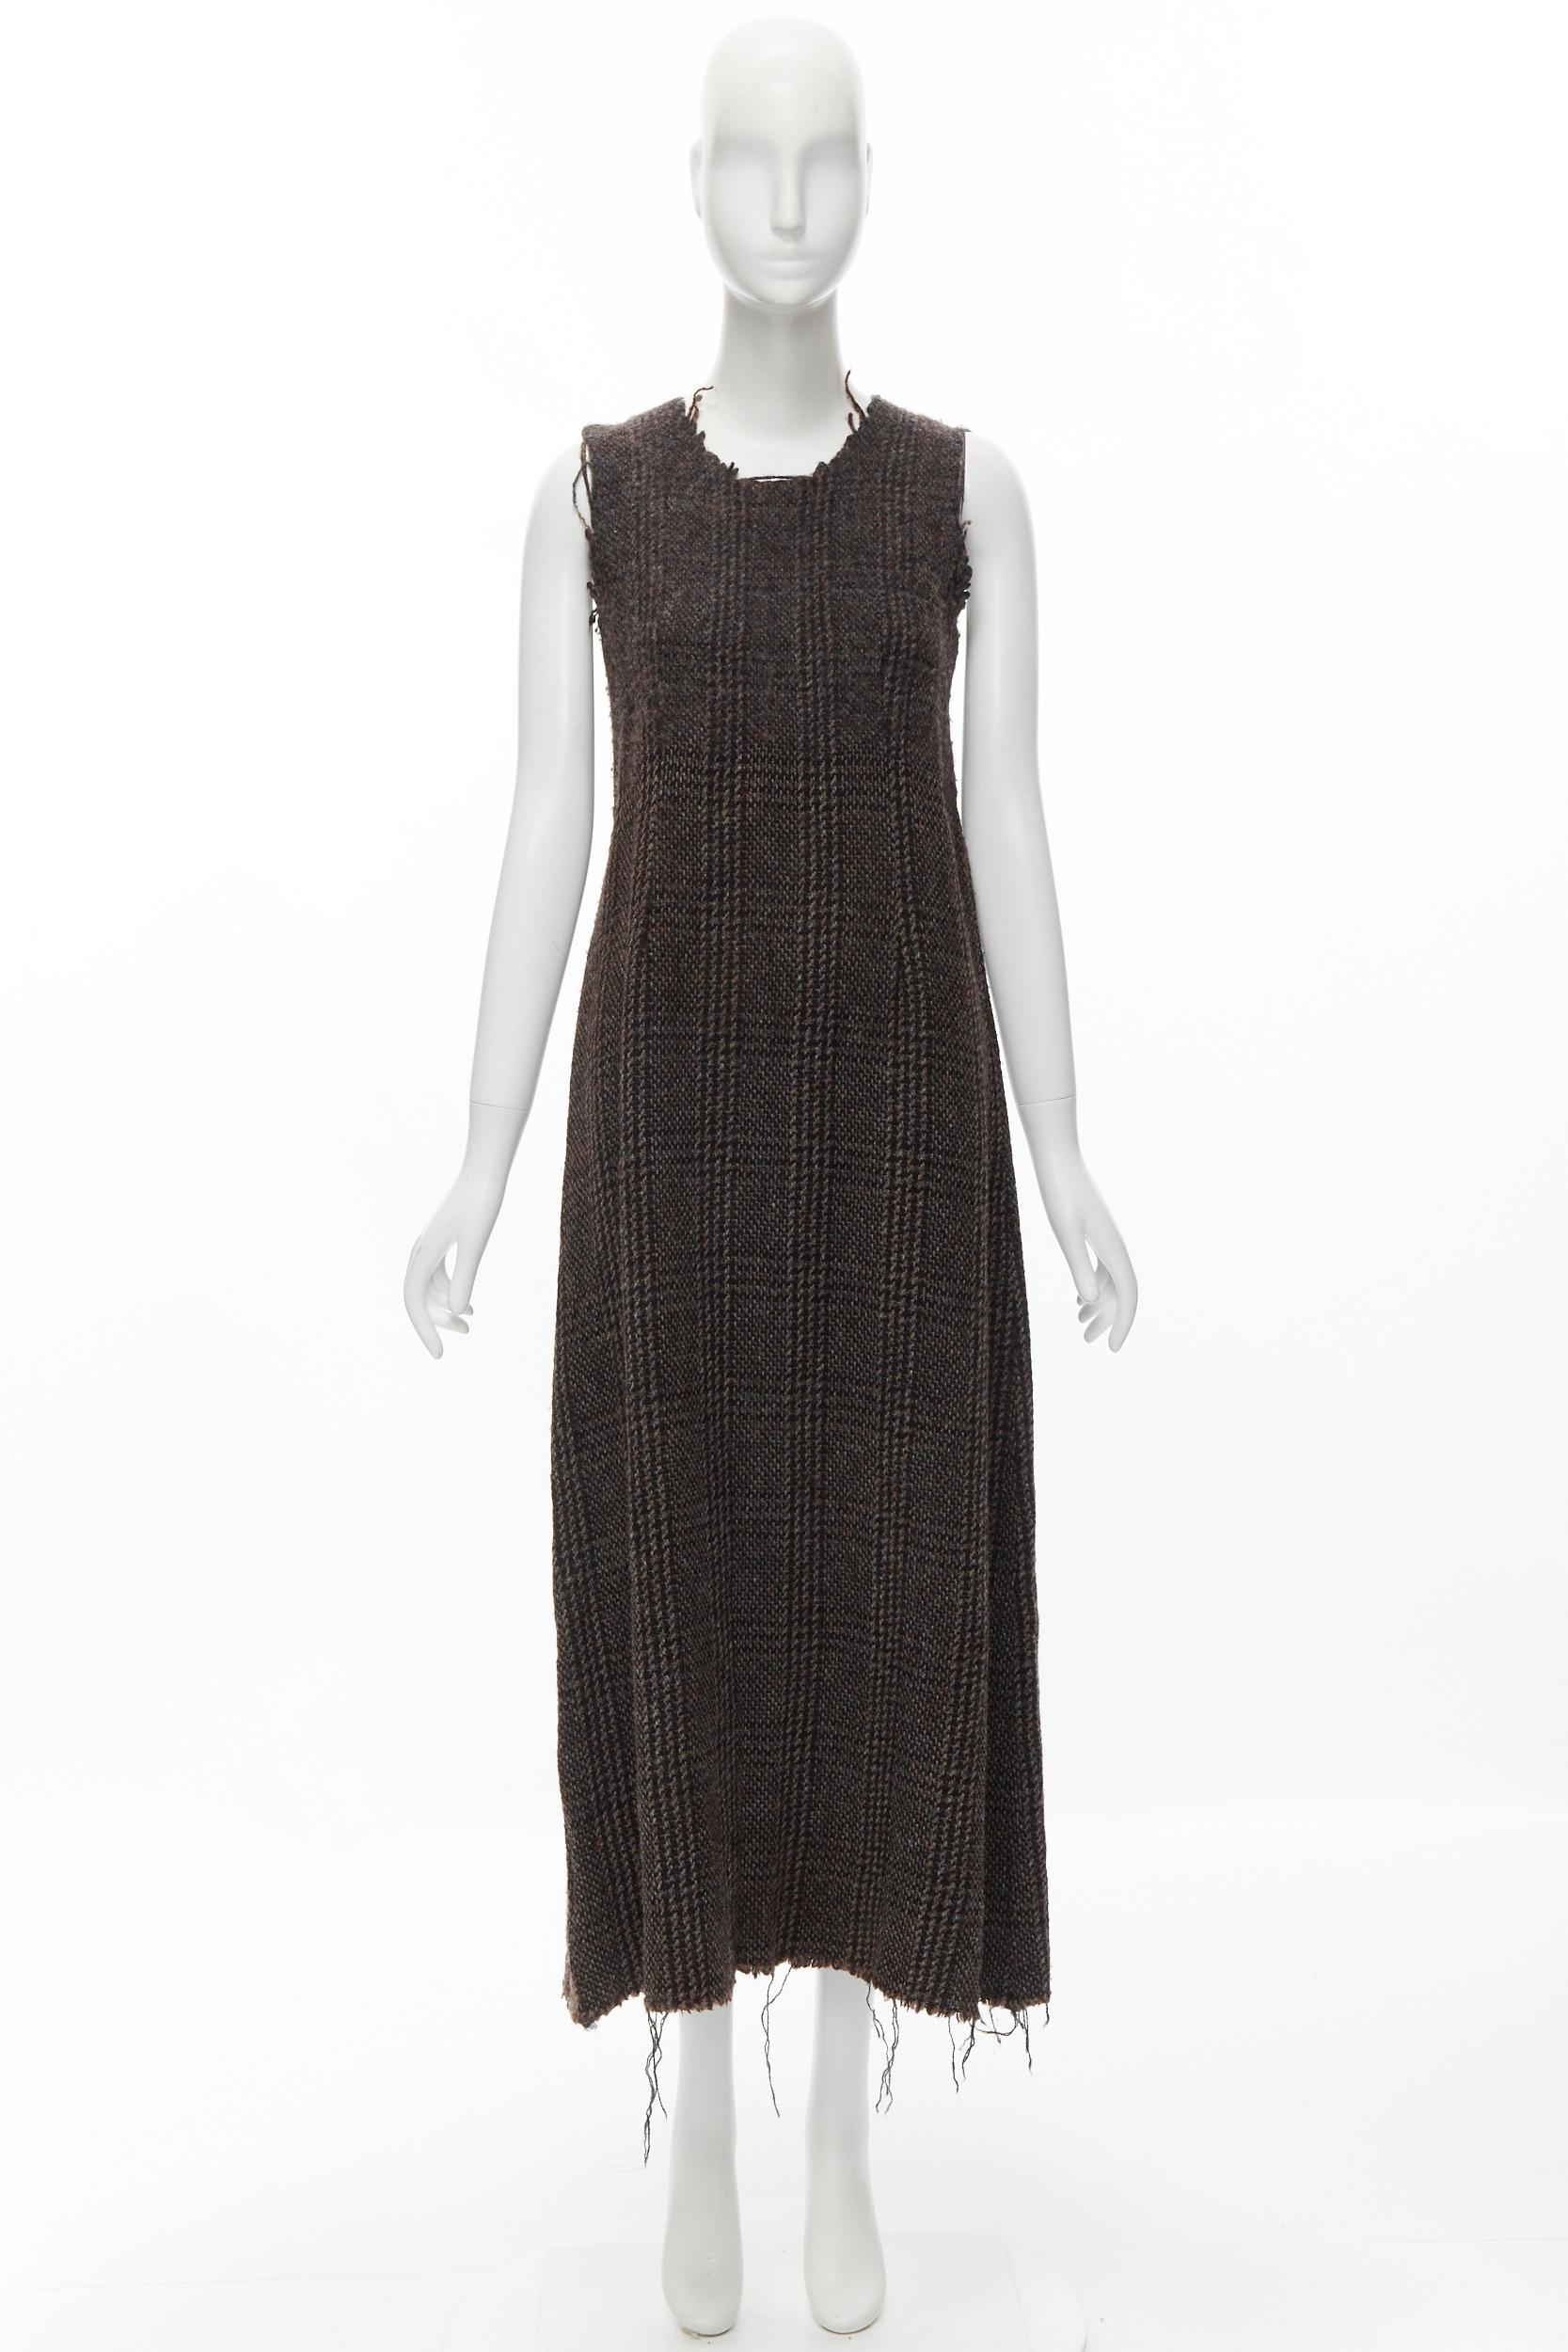 COMME DES GARCONS Vintage 1994 check boiled wool tweed raw frayed midi dress M For Sale 5